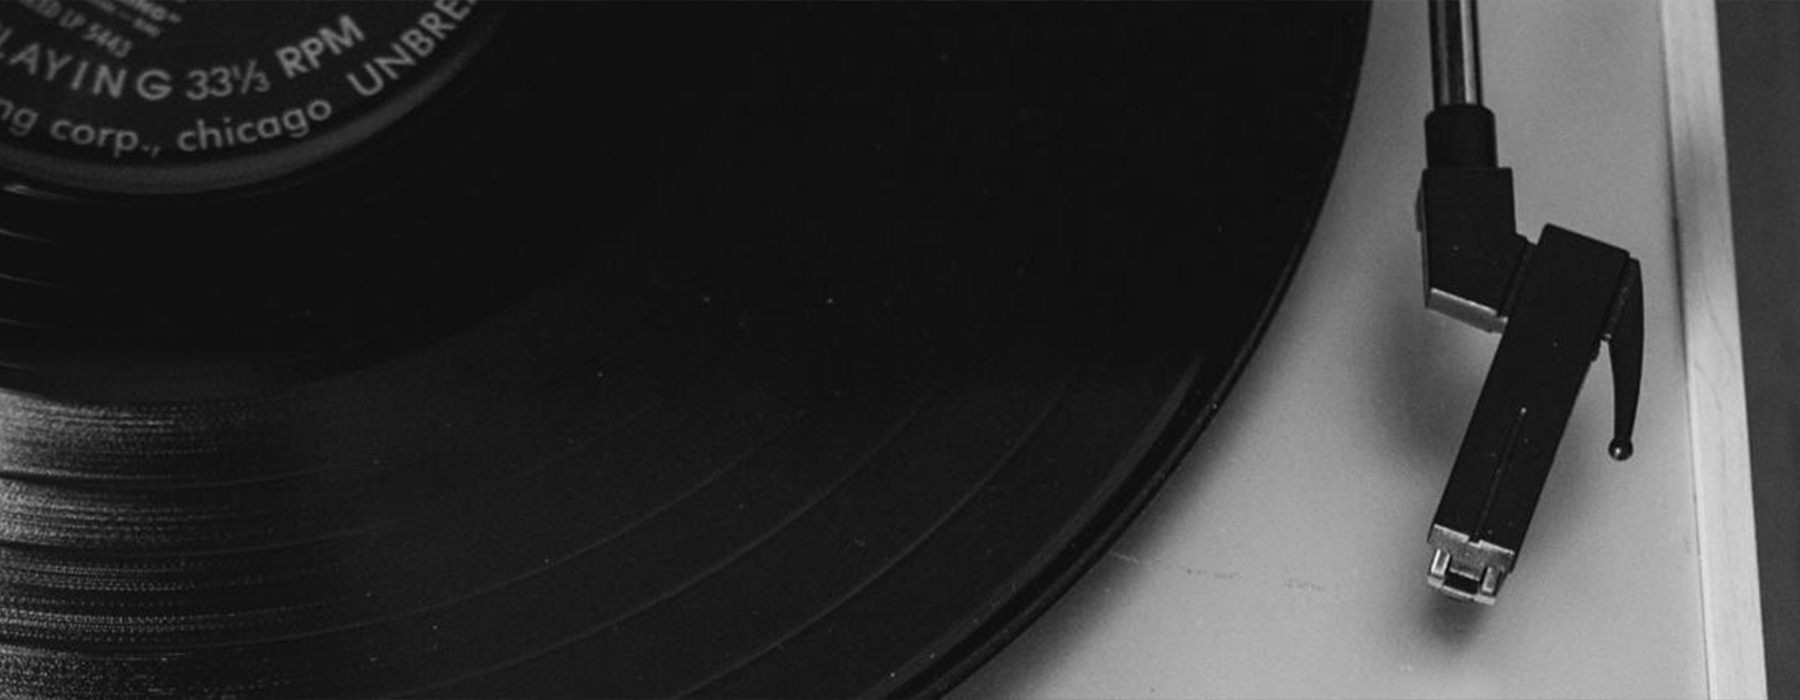 Black and White Photo of Record Player | RT Dairies